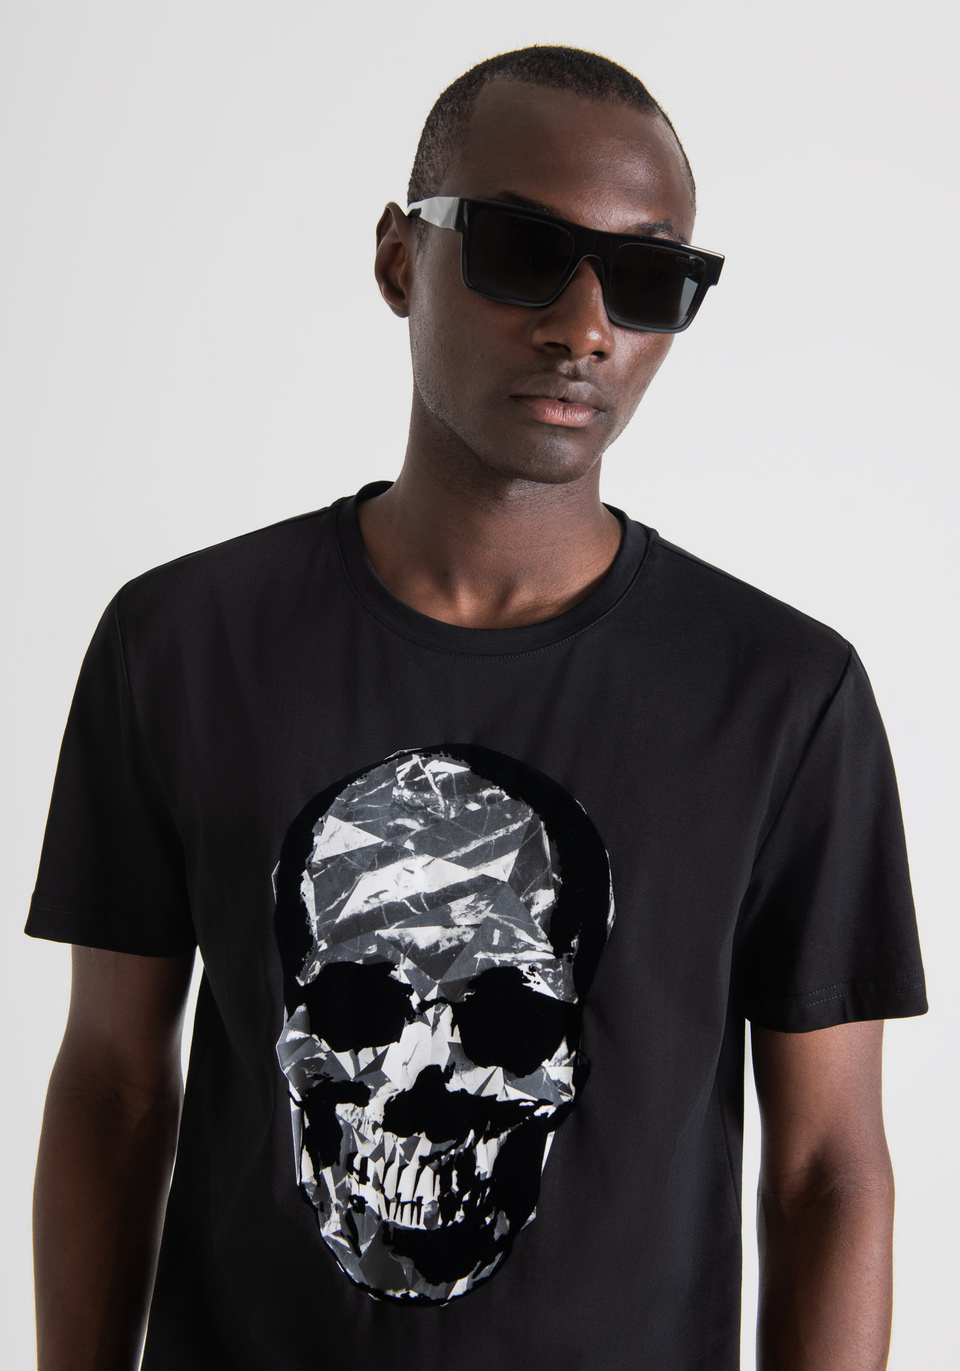 SLIM-FIT T-SHIRT IN PURE COTTON WITH SKULL PRINT - Antony Morato Online Shop